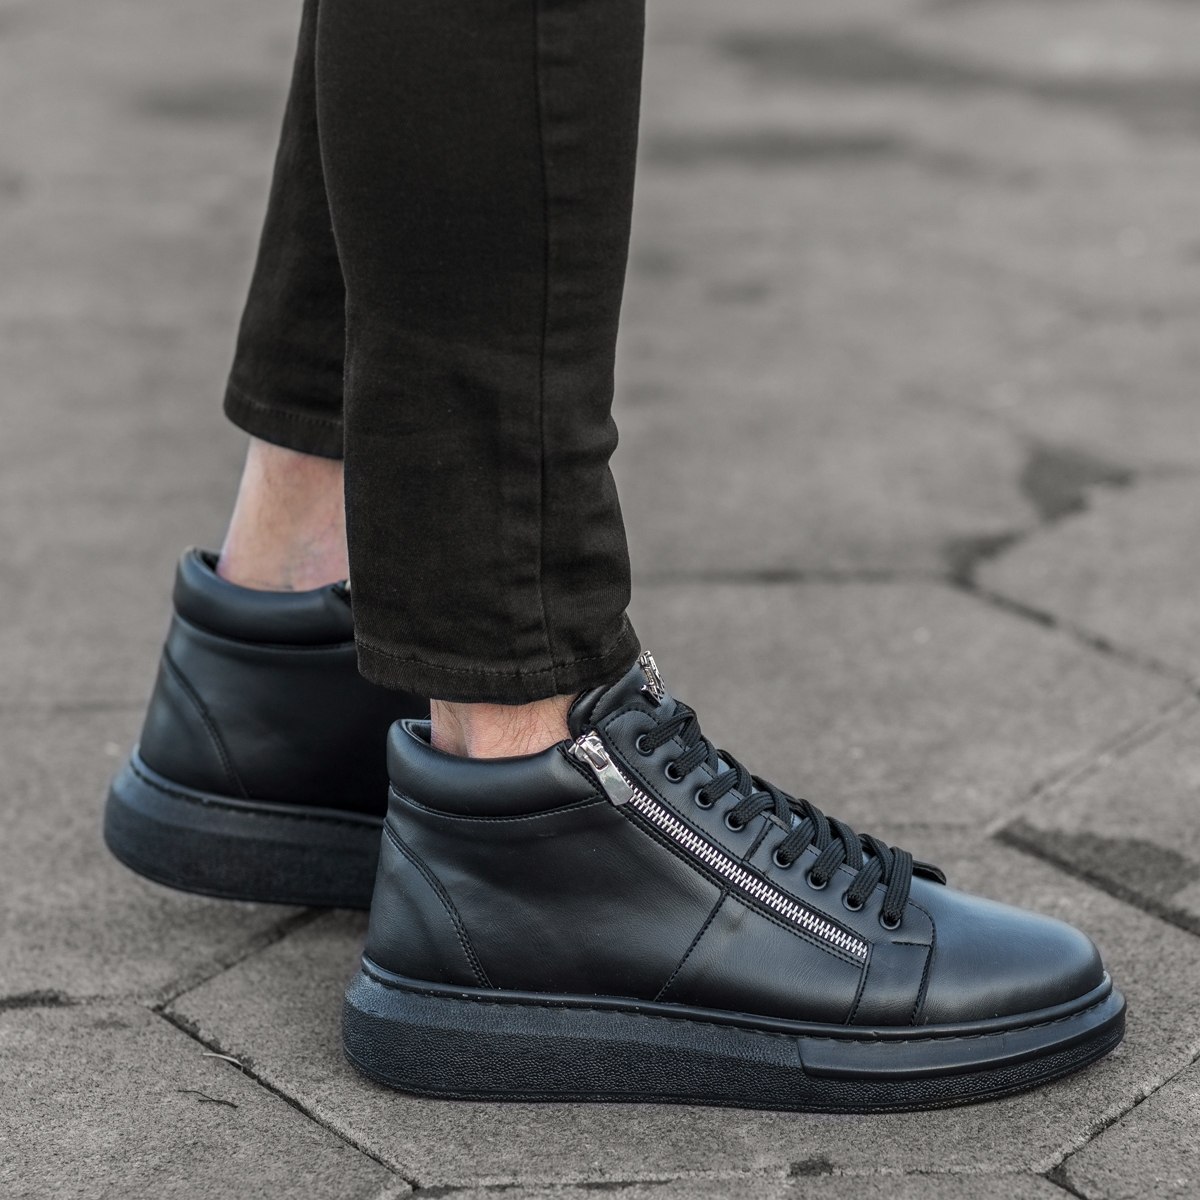 Hype Sole Zipped Style High Top Sneakers in Full Black | Martin Valen